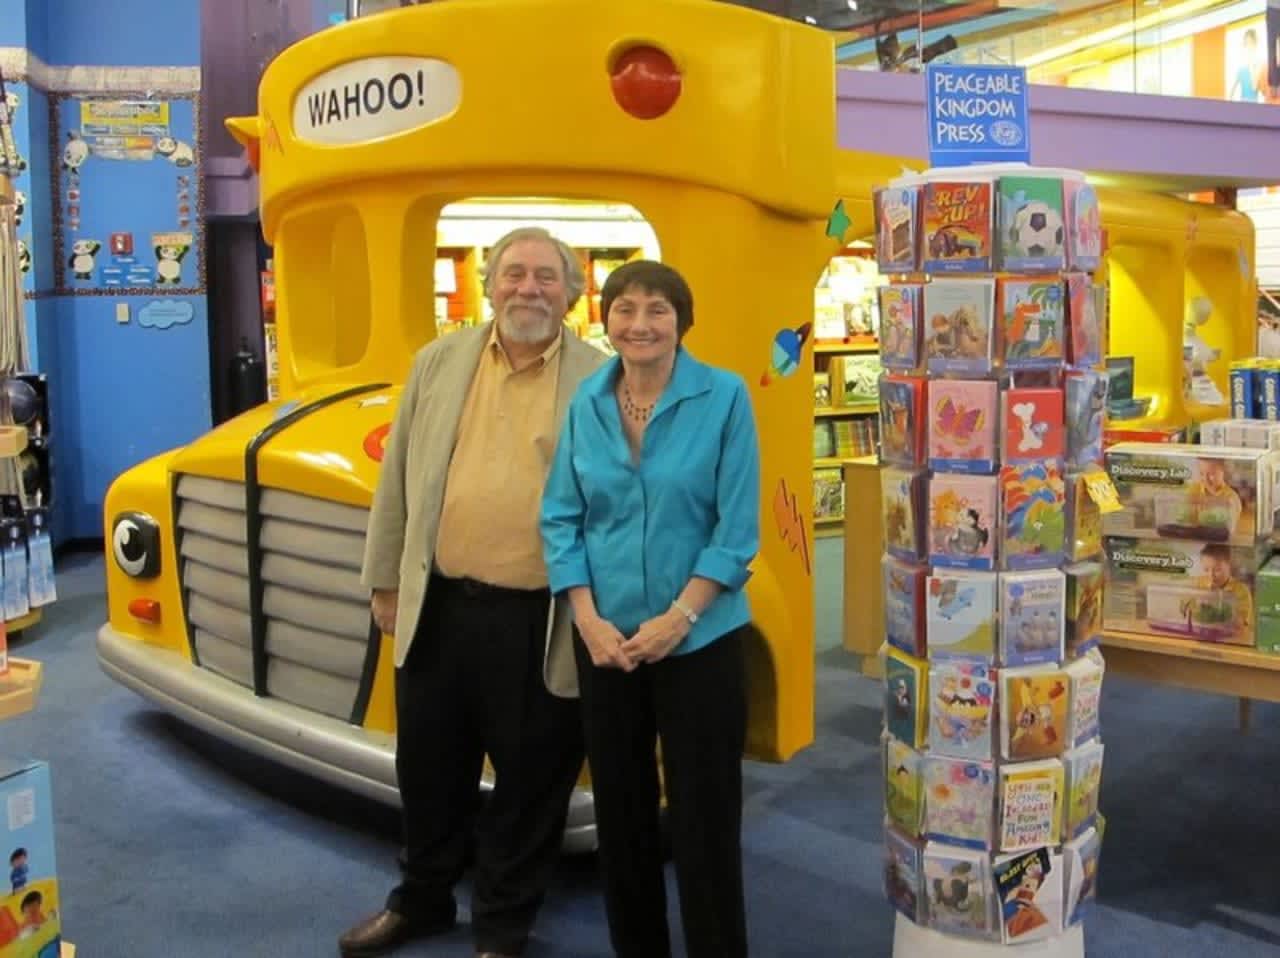 "The Magic School Bus" author Joanna Cole and illustrator The creators of The Magic School Bus series: illustrator Bruce Degen at the Scholastic Store in New York City .